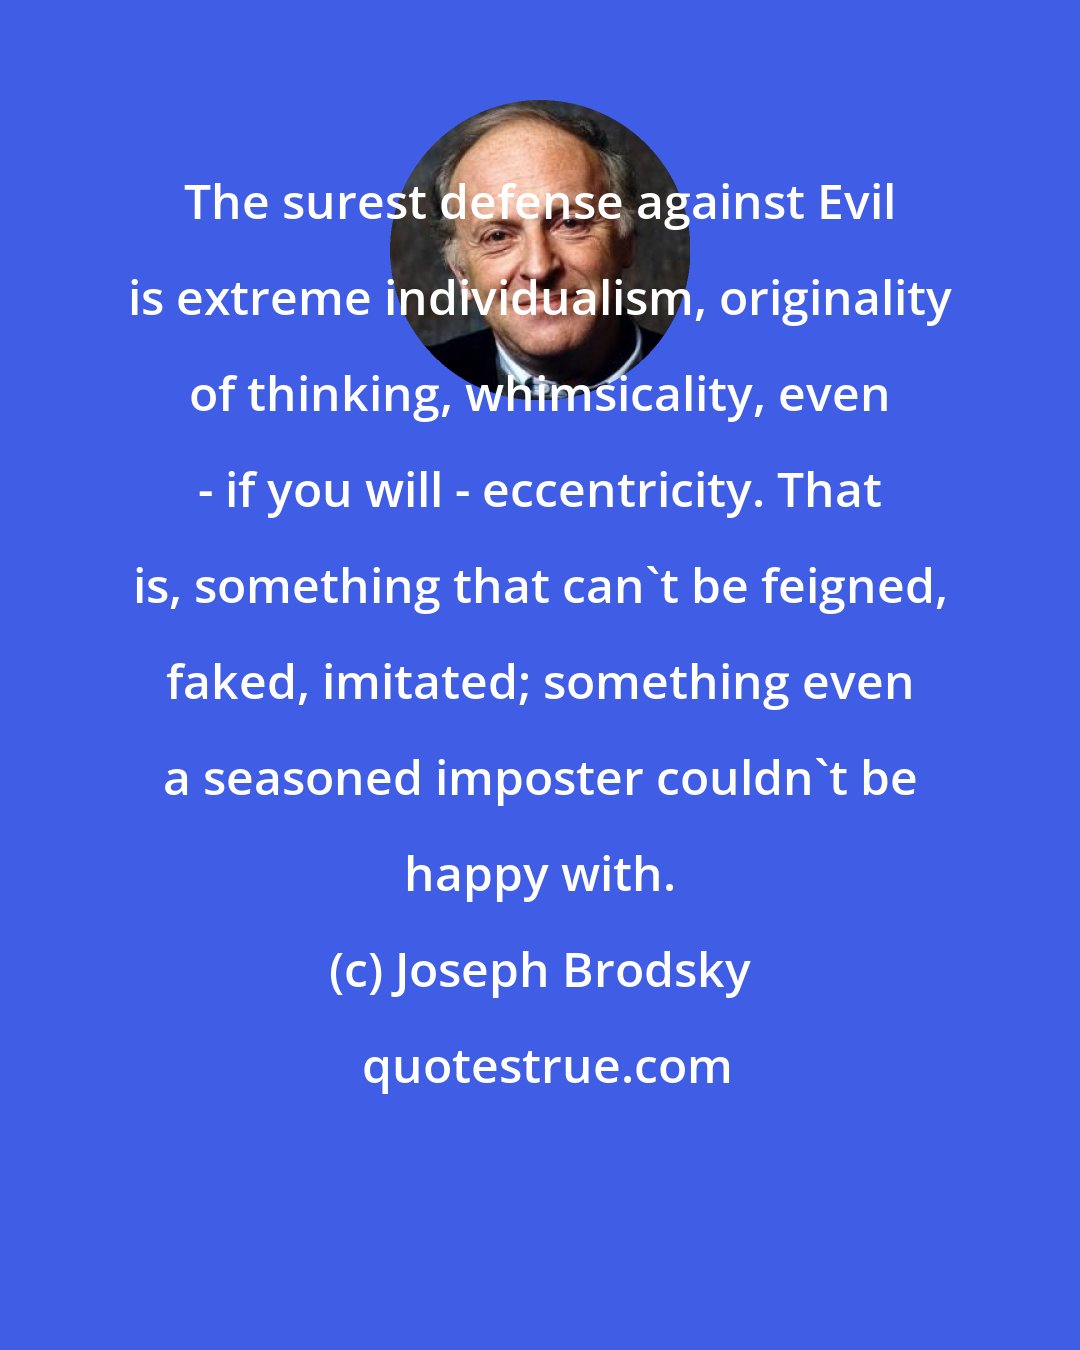 Joseph Brodsky: The surest defense against Evil is extreme individualism, originality of thinking, whimsicality, even - if you will - eccentricity. That is, something that can't be feigned, faked, imitated; something even a seasoned imposter couldn't be happy with.